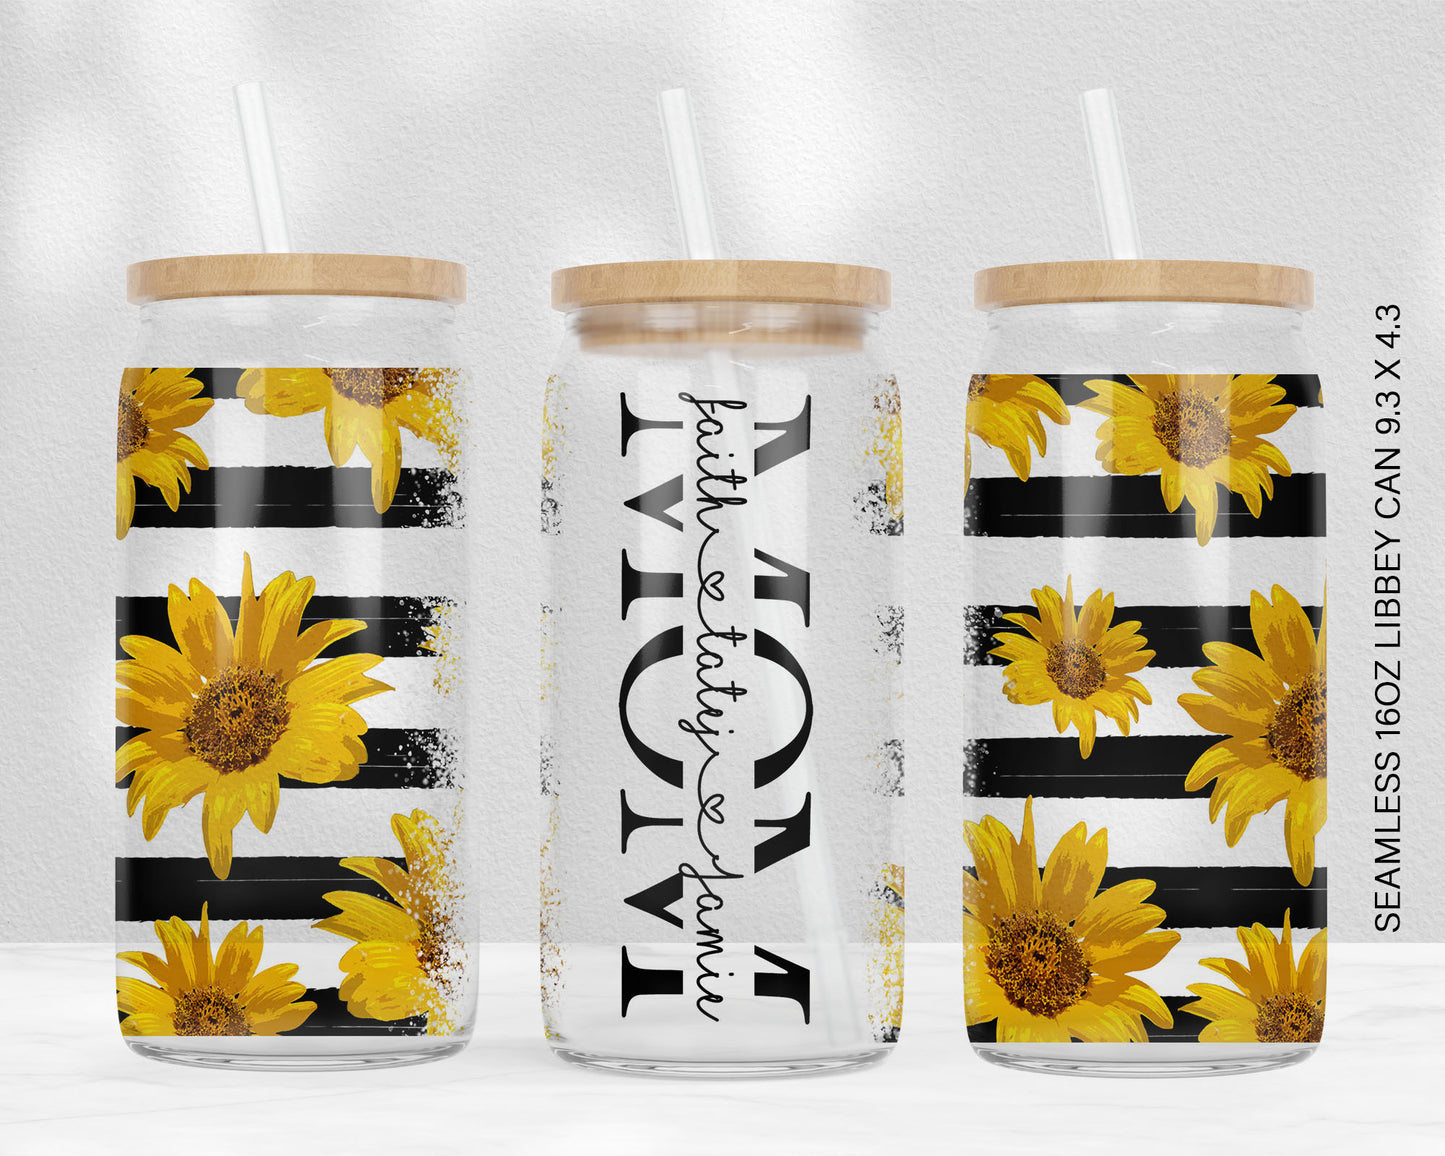 Monstera Glass Can Sublimation Designs. Full Wrap - So Fontsy